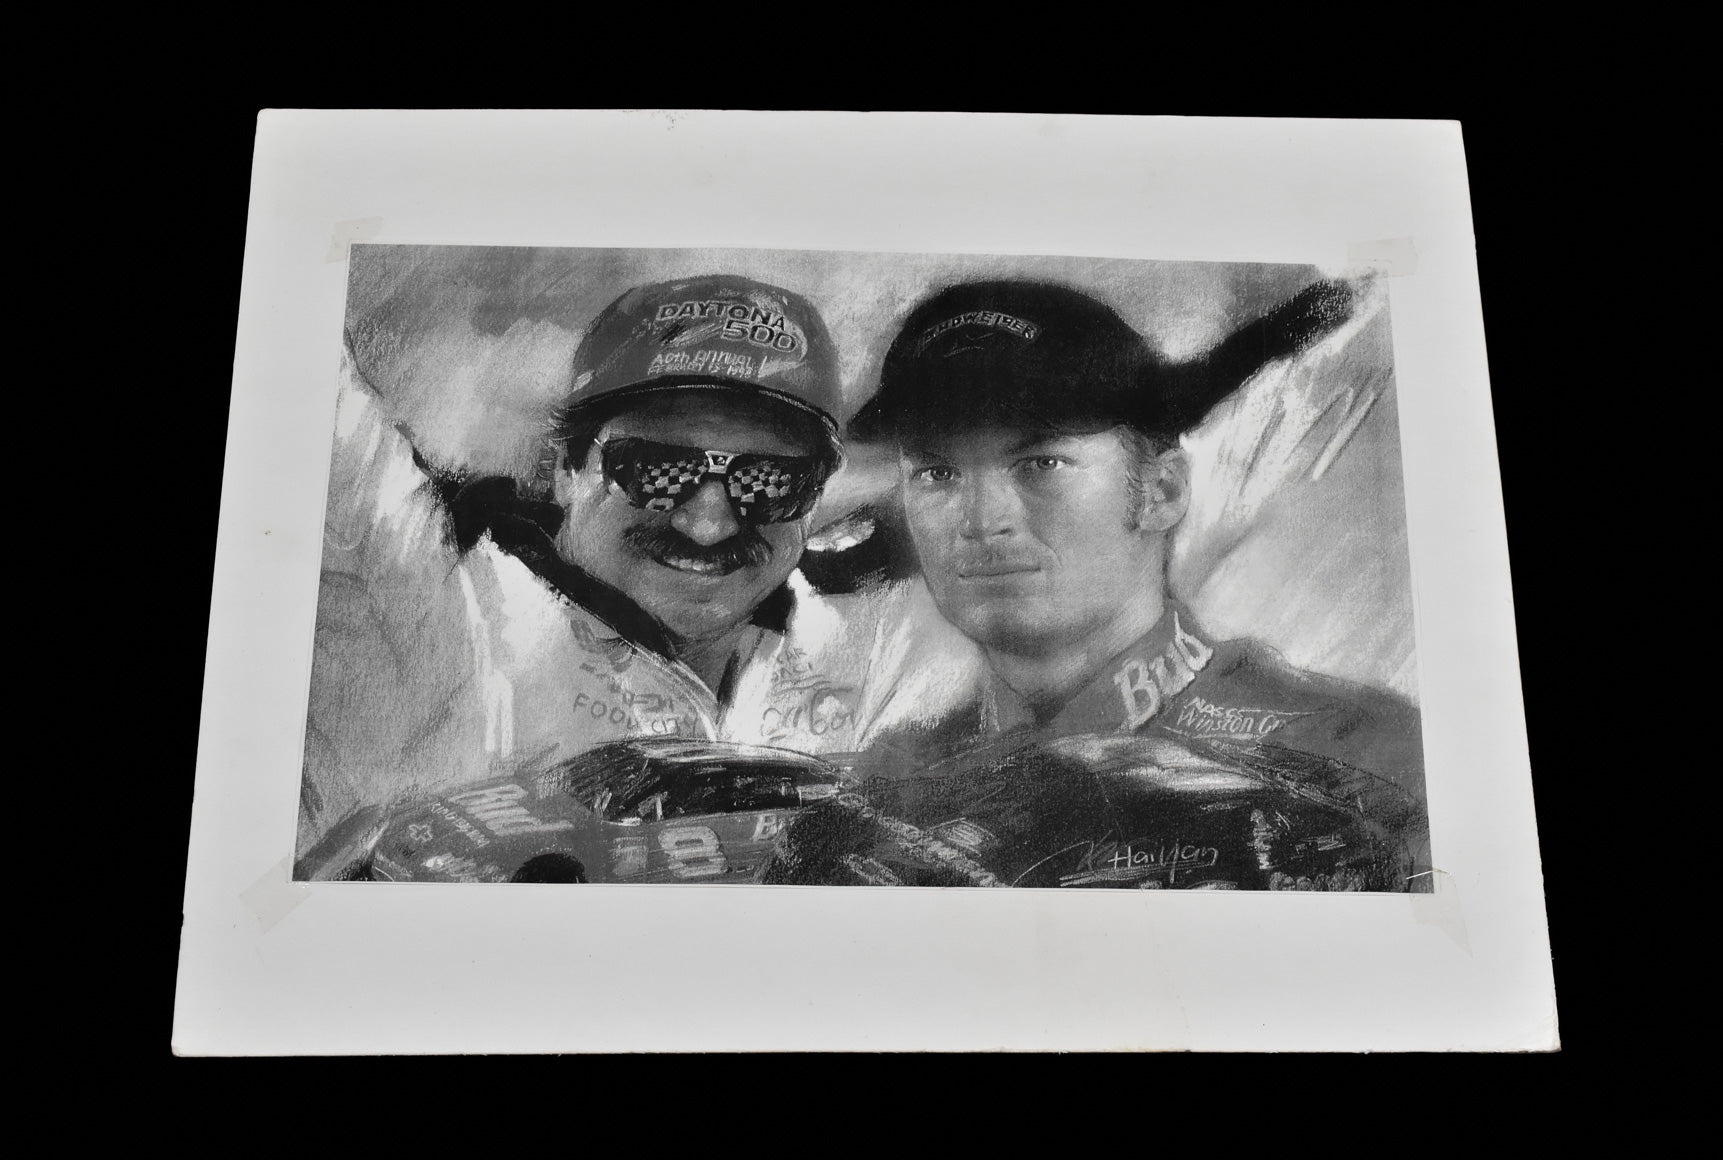 Dale Earnhardt & Jr Sketch 11x17 Reproduction Print On Board Used